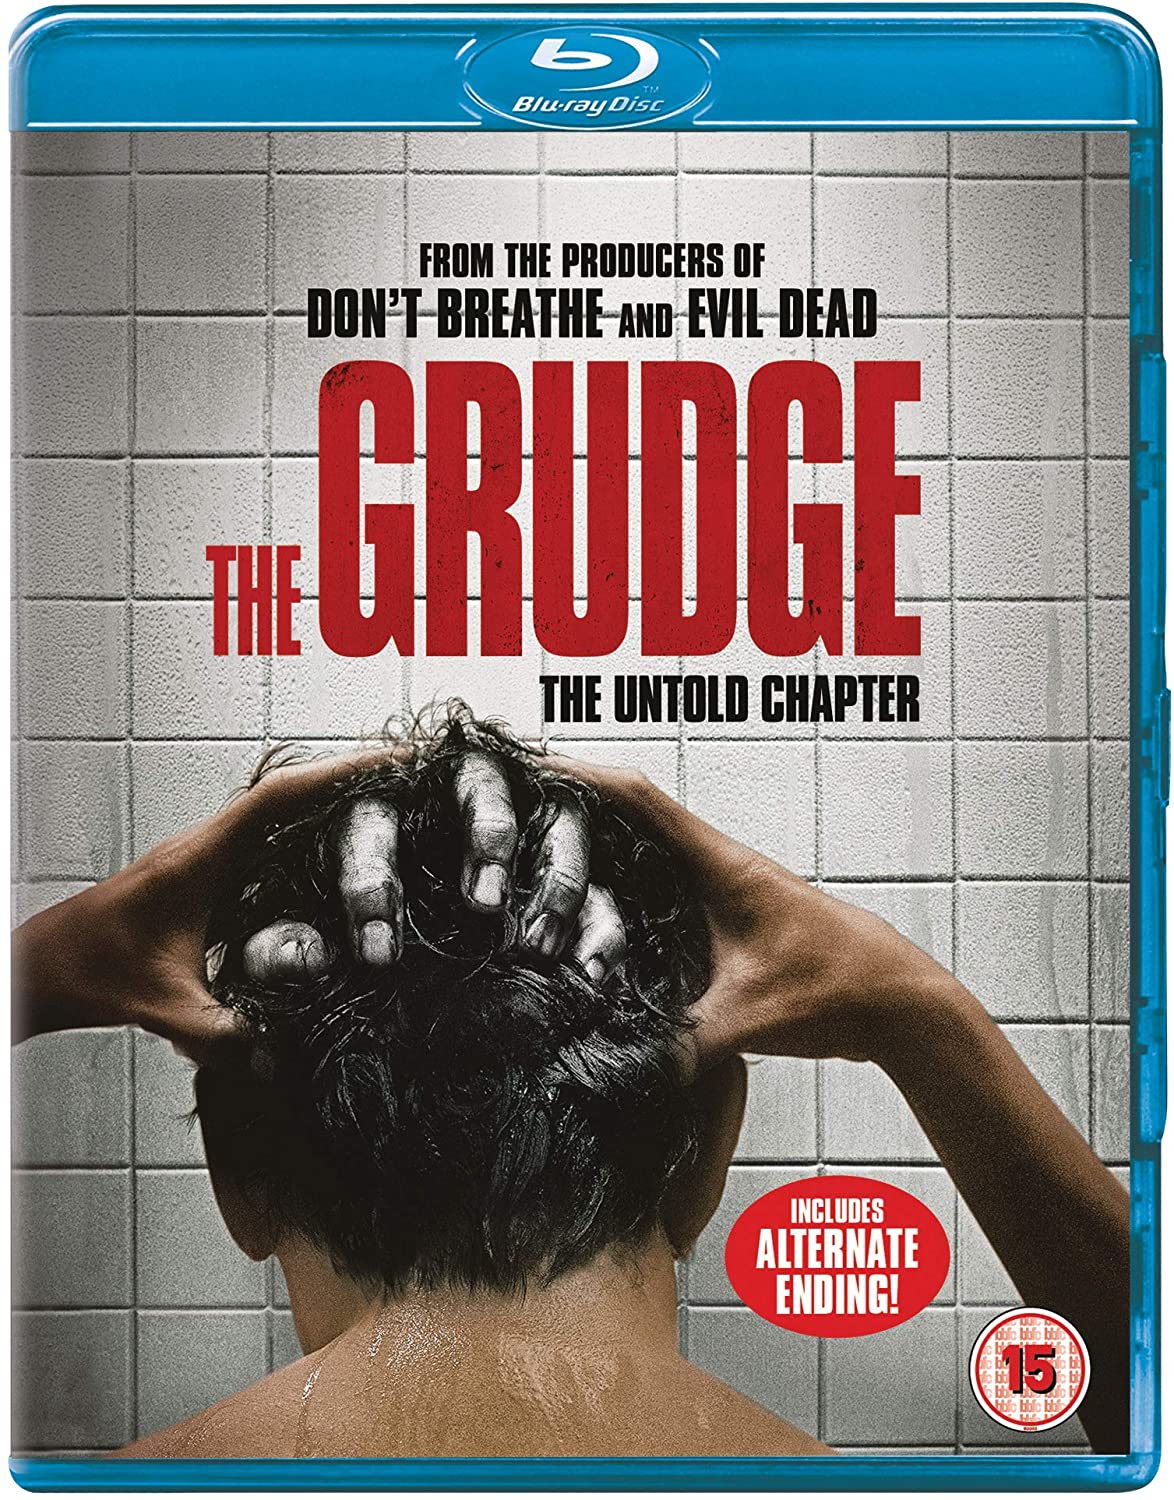 boom competitions - win The Grudge on Blu-ray